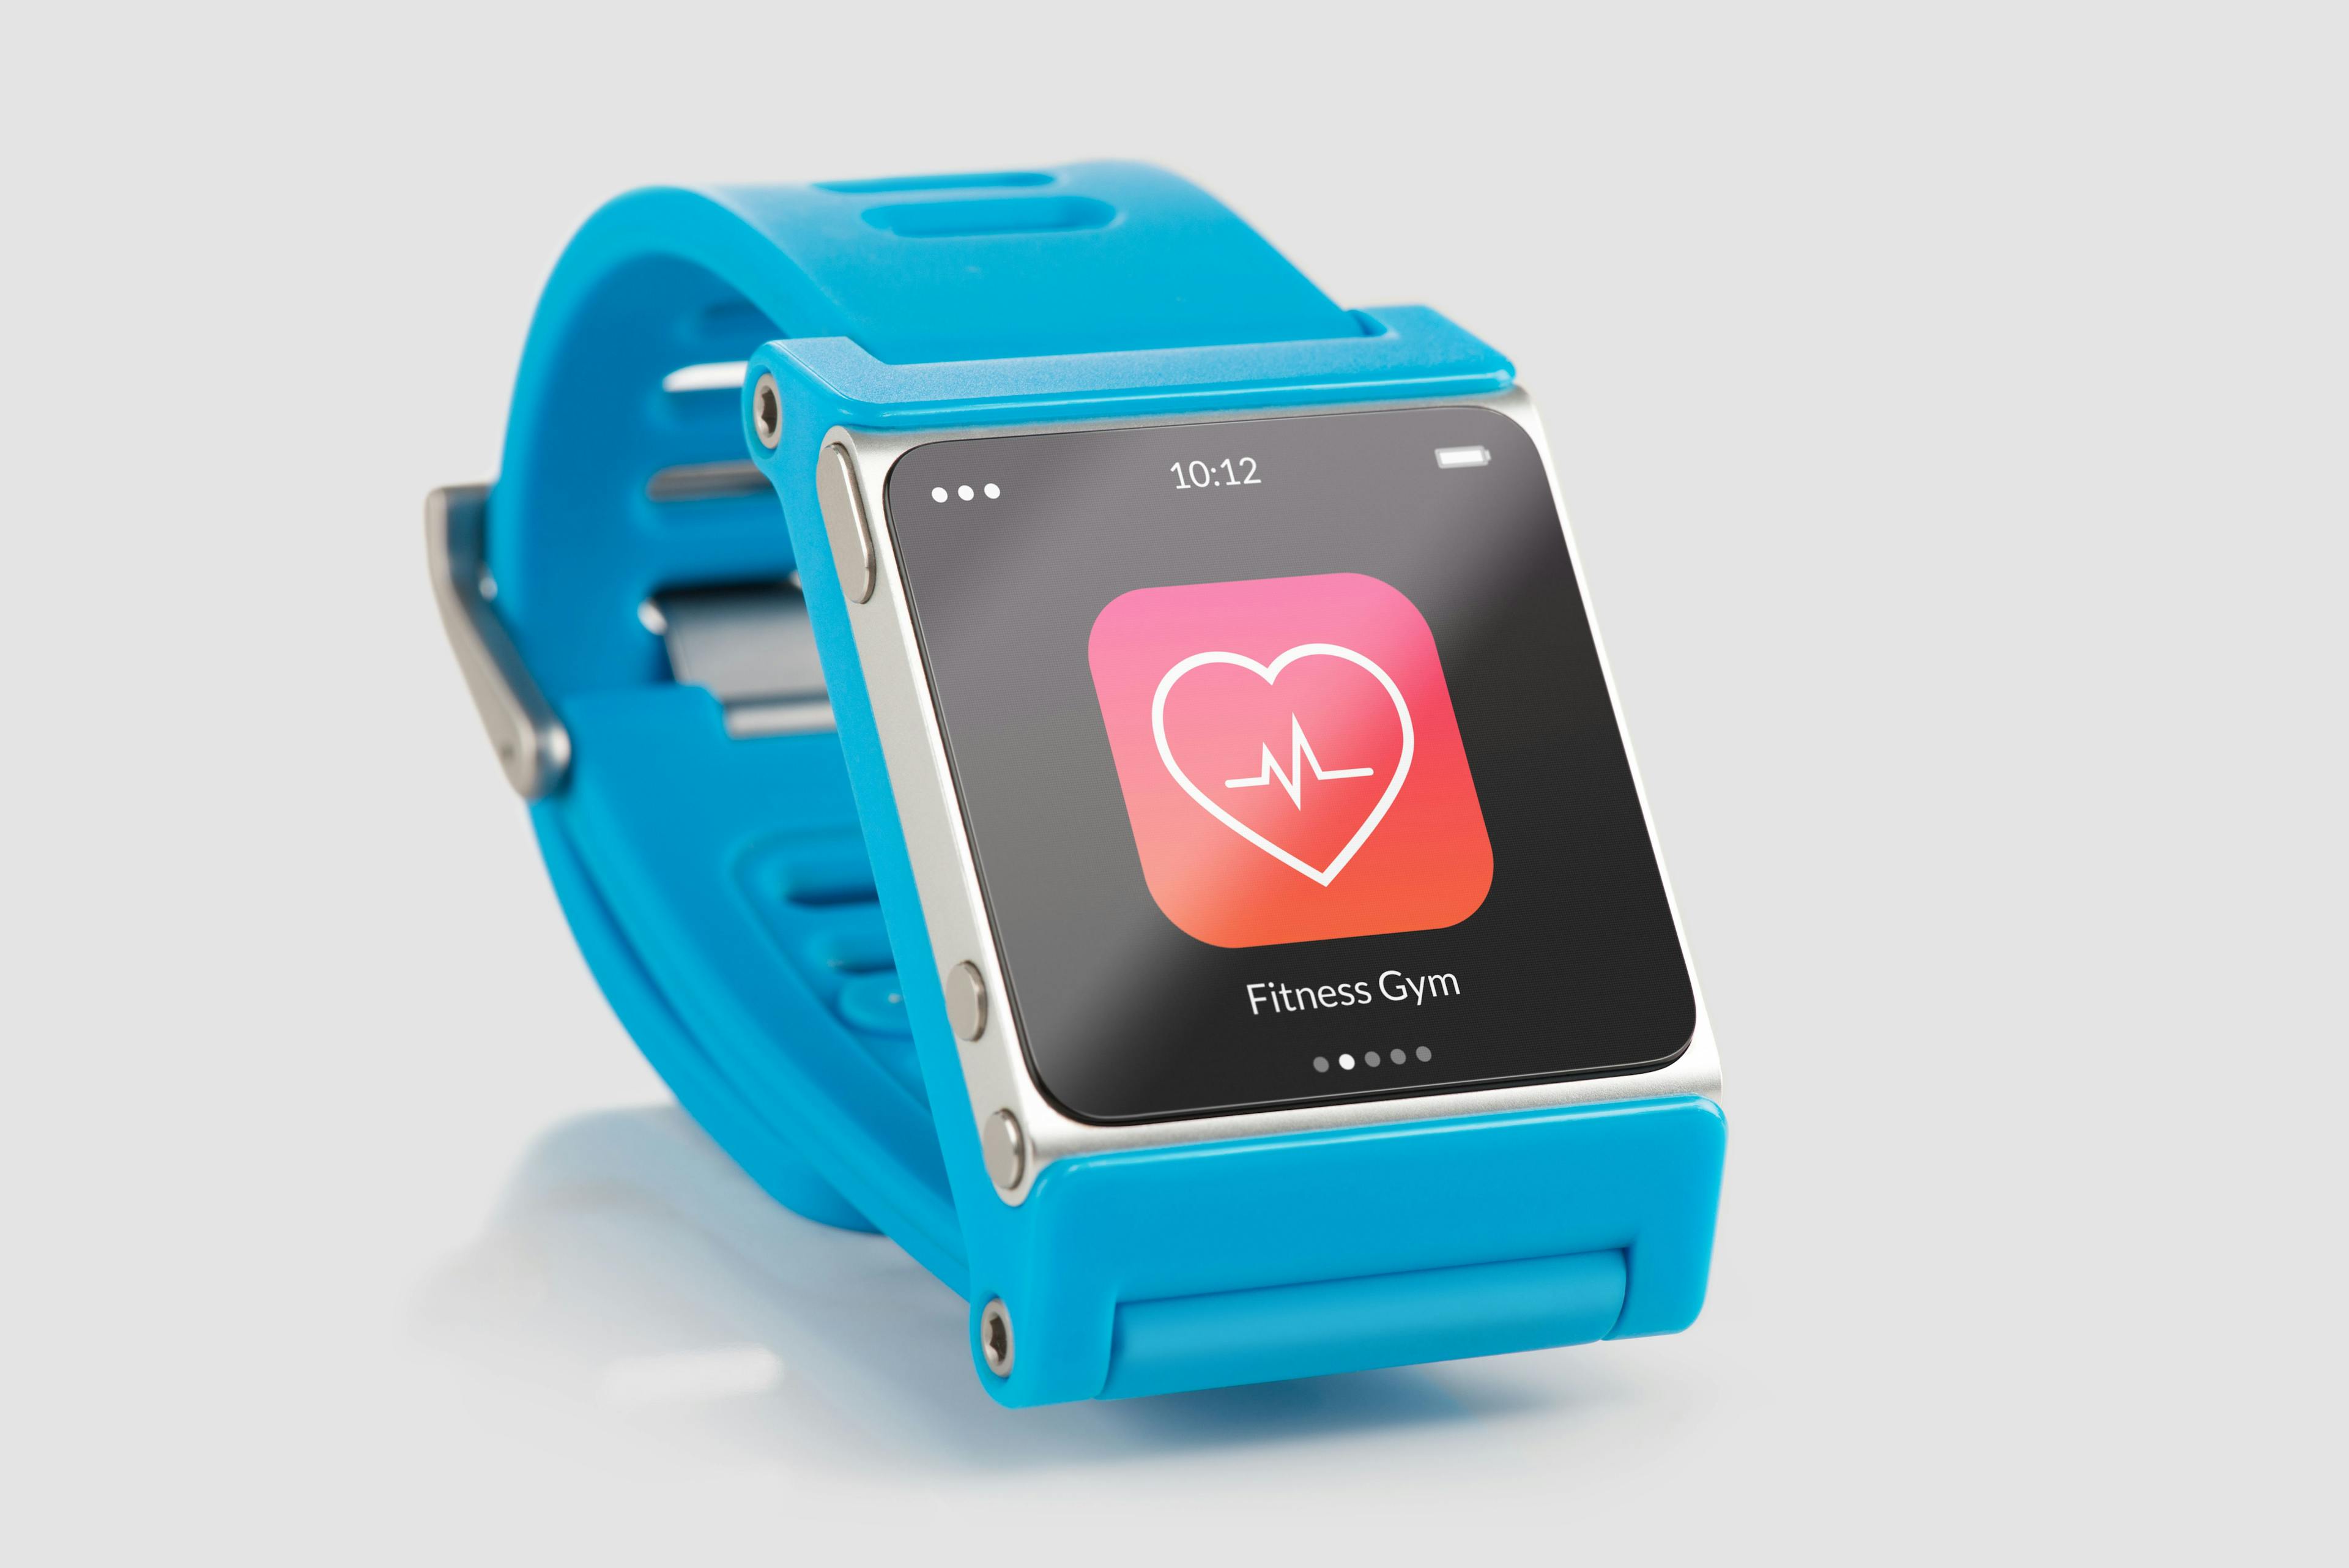 image of a wearable fitness tracker